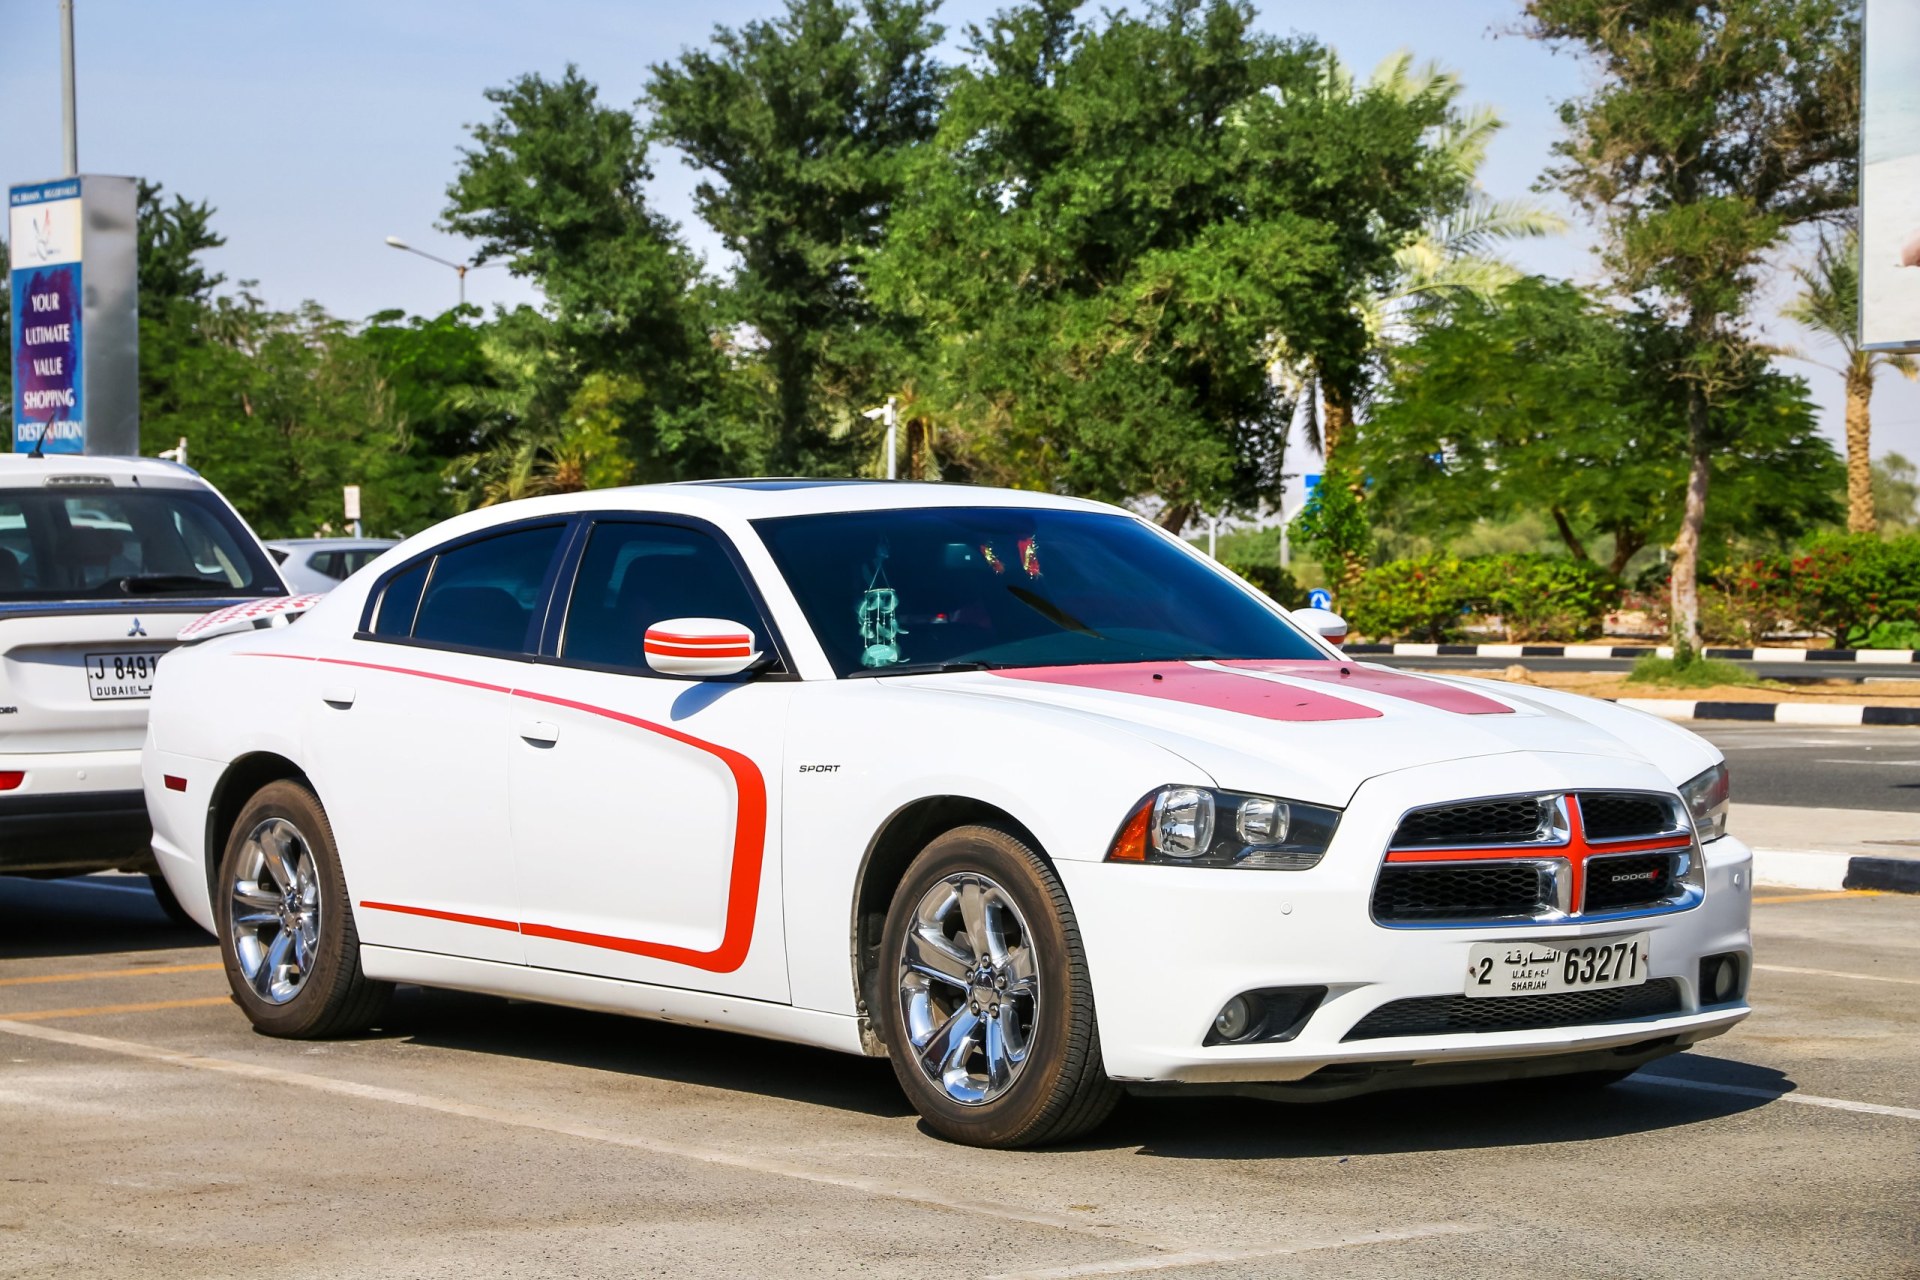 2011 American muscle car Dodge Charger in the sand desert.